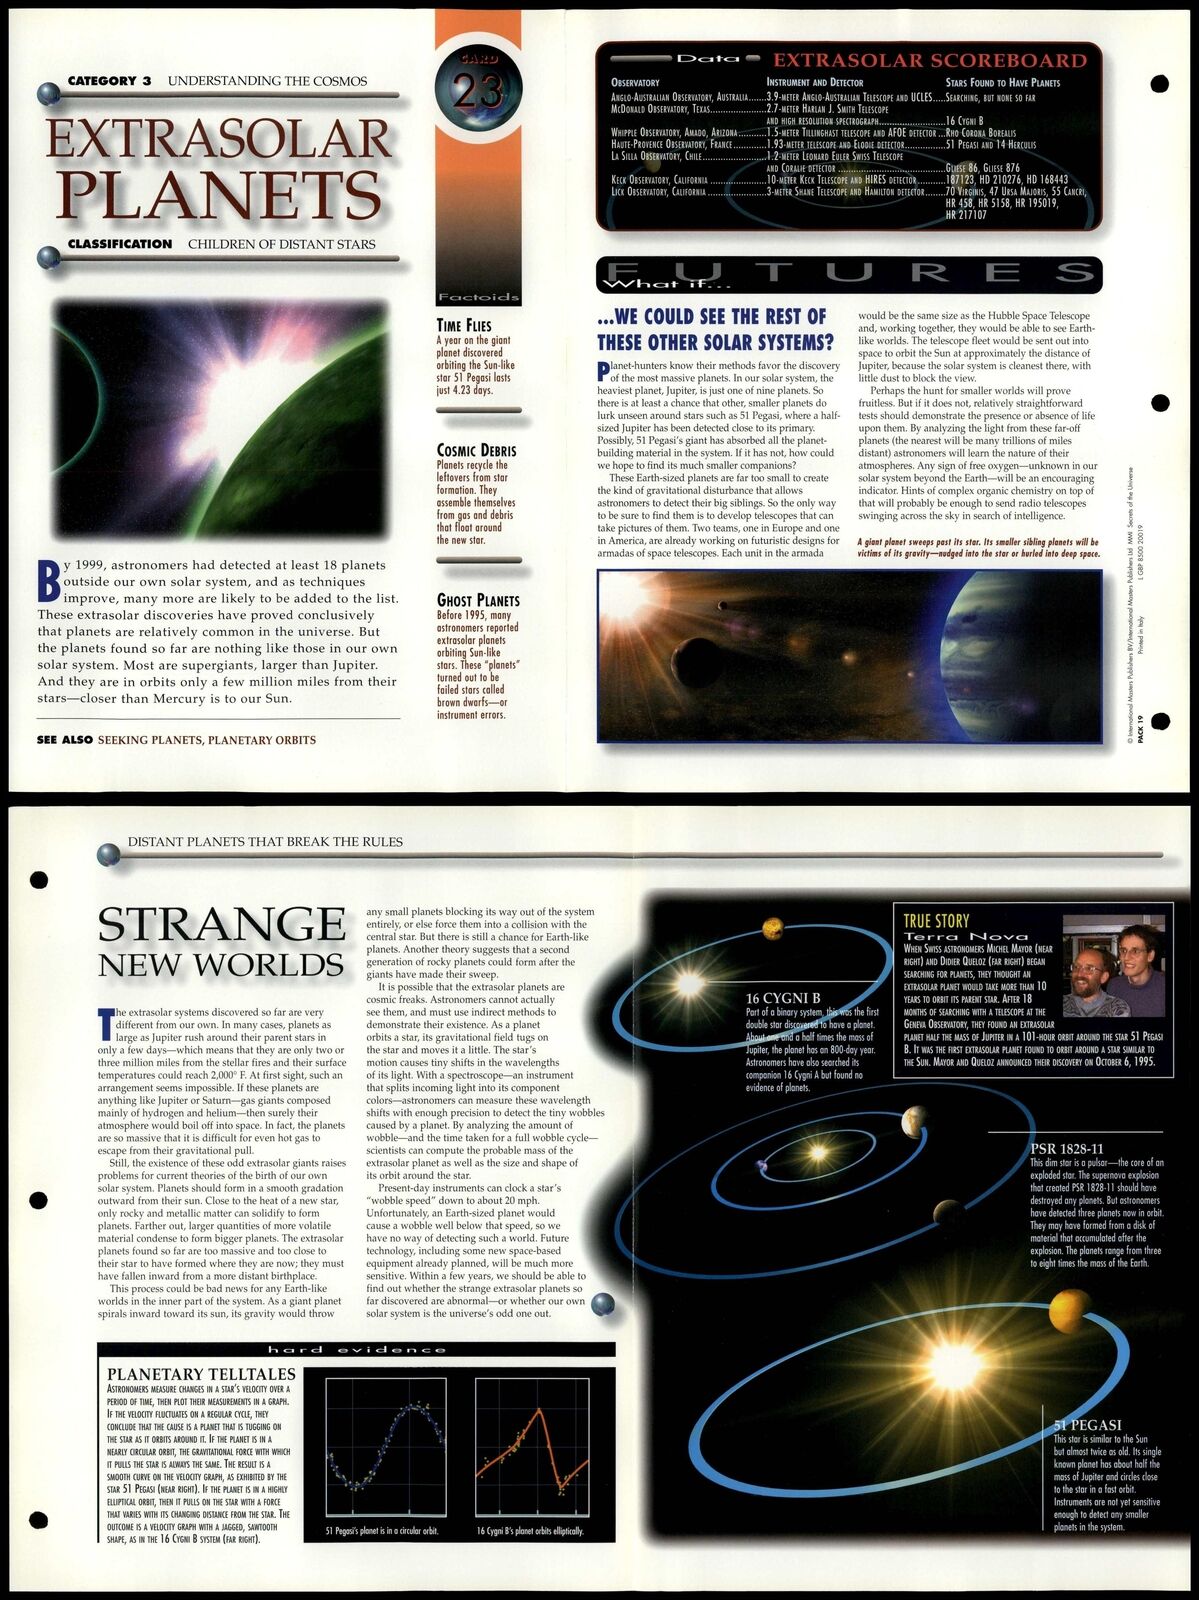 Extrasolar Planets #23 Cosmos Secrets Of The Universe Fact File Fold-Out Page